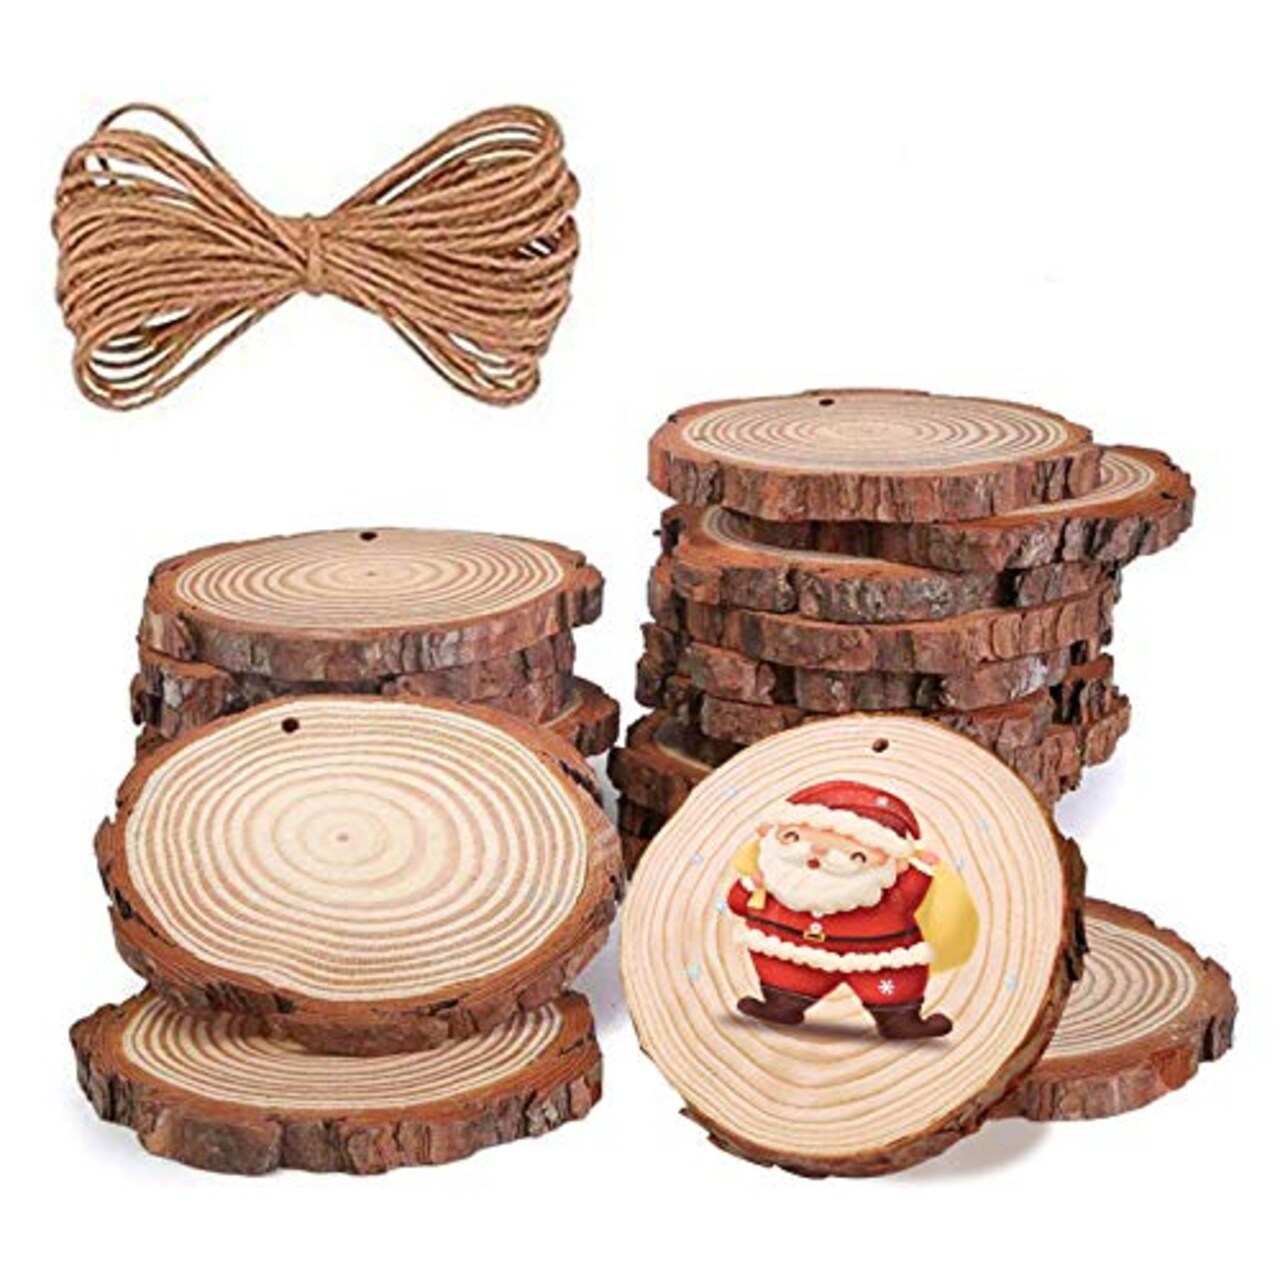 chfine Natural Wood Slices for Crafts 42 Pcs 2.4-2.8 Inches